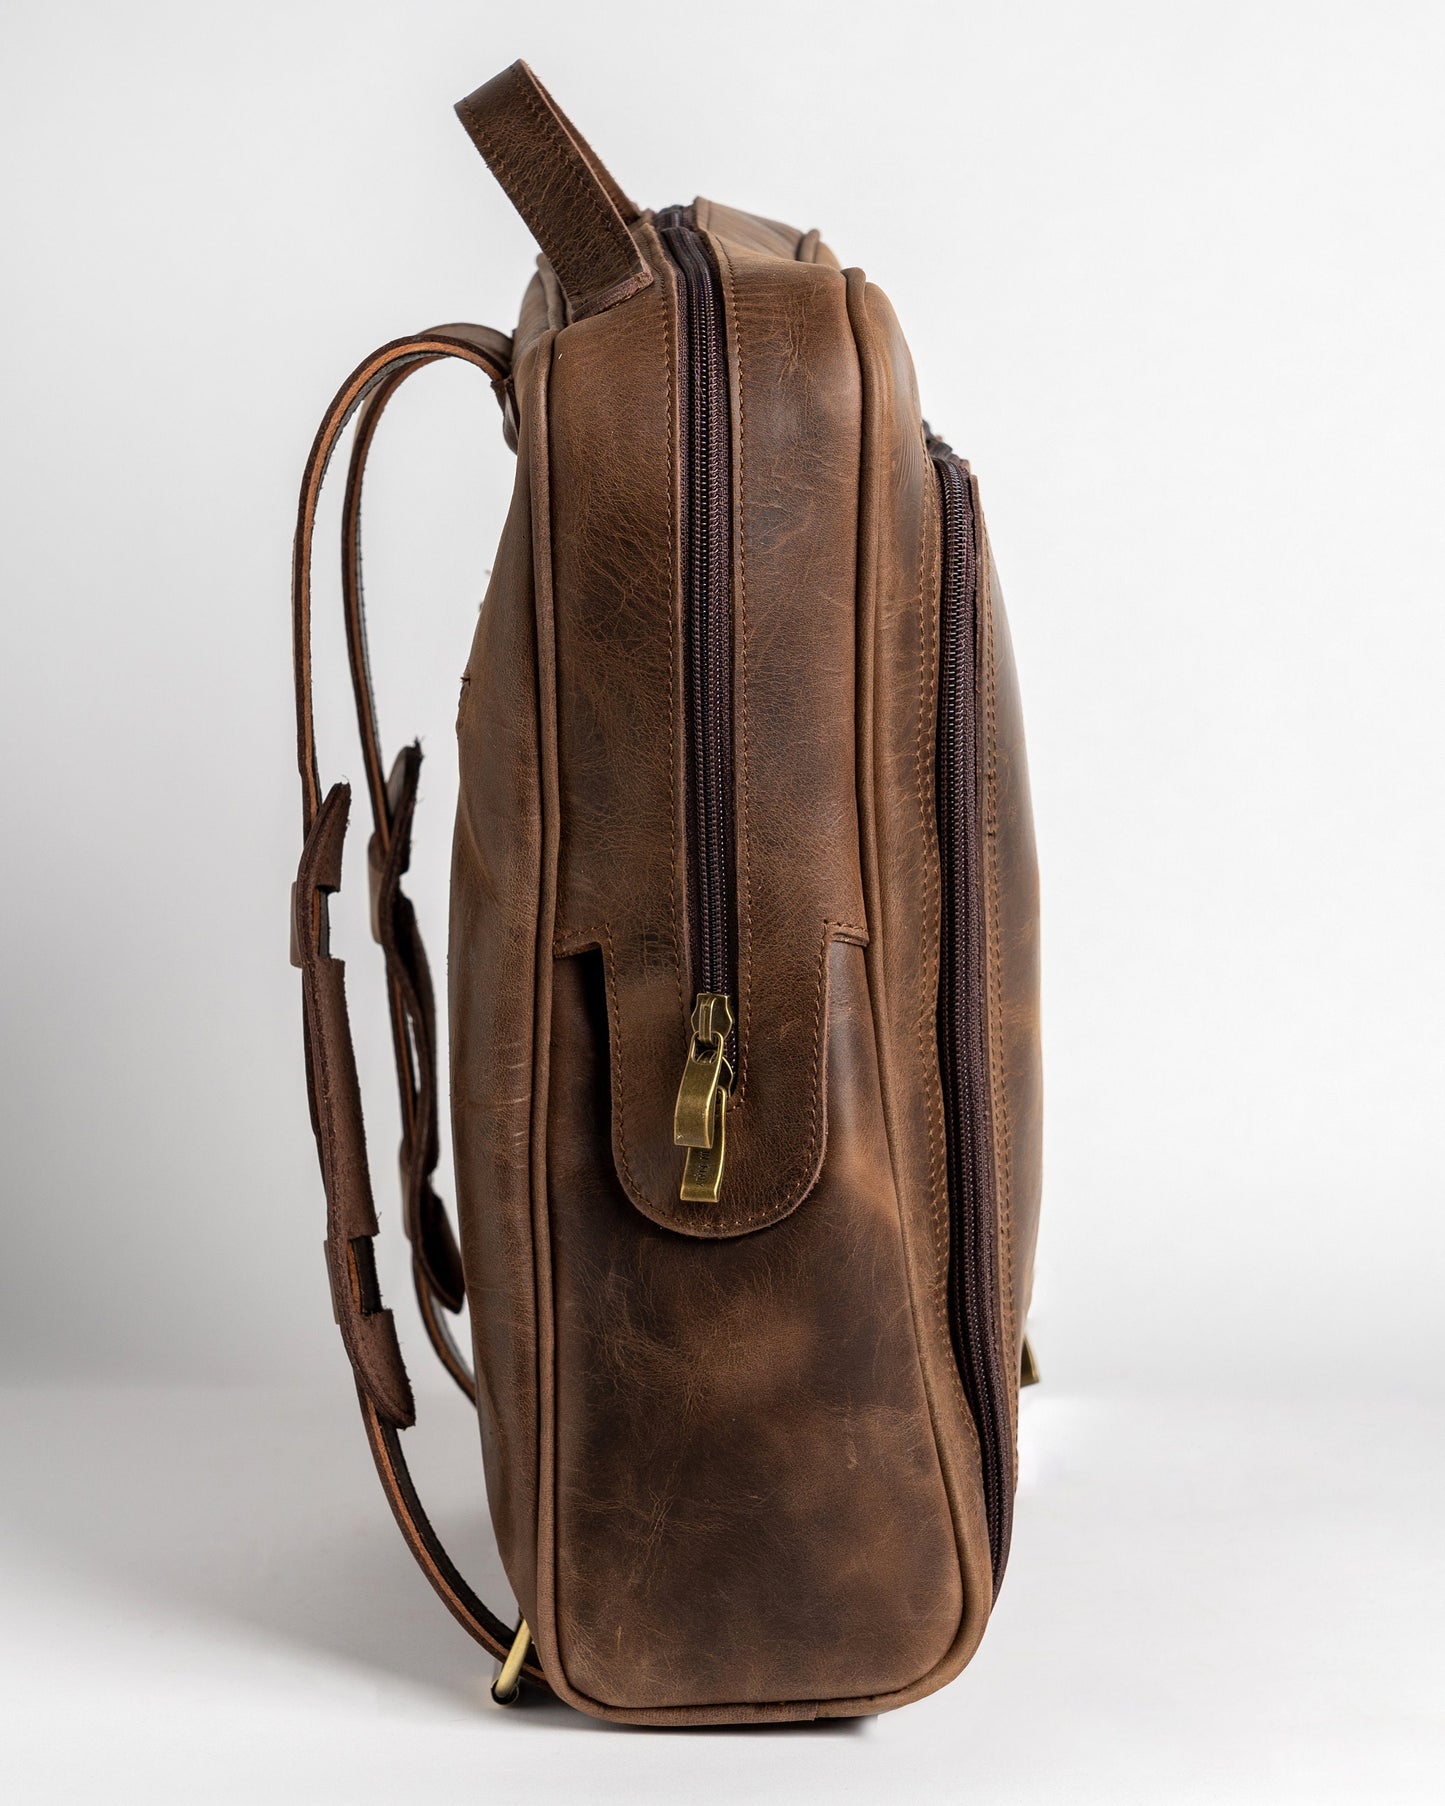 Leather backpack men, Leather rucksack, Leather backpack men laptop, Calf leather backpack